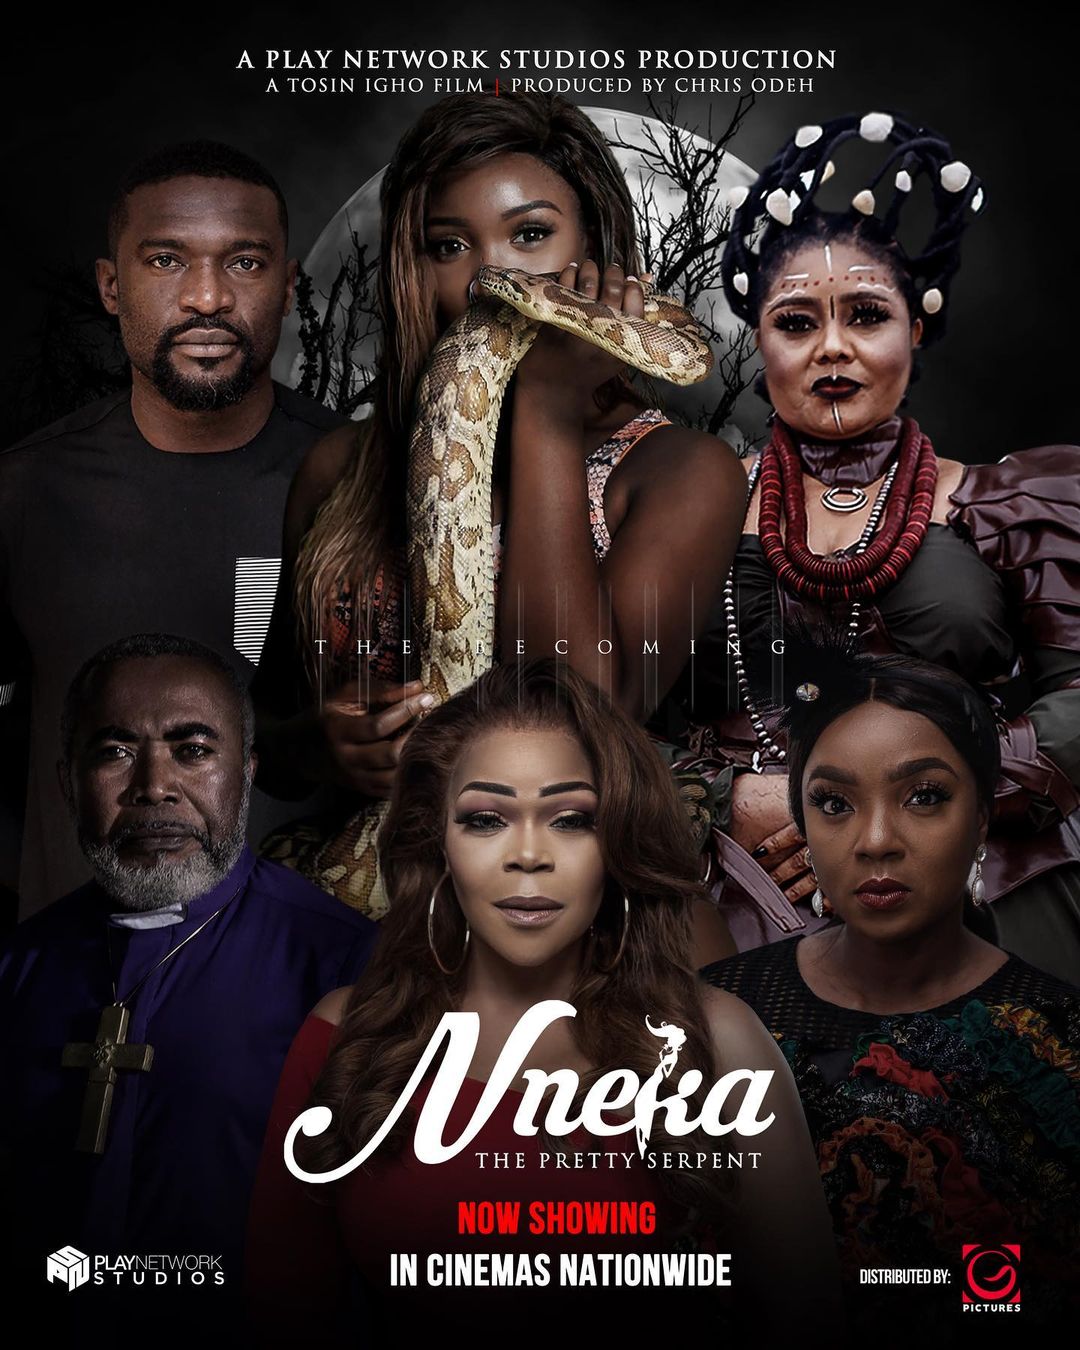 131888284 226615412363598 5361686000572706420 n - “Nneka The Pretty Serpent” Pulls N6.58 Million Opening with Friday Theatrical Loss